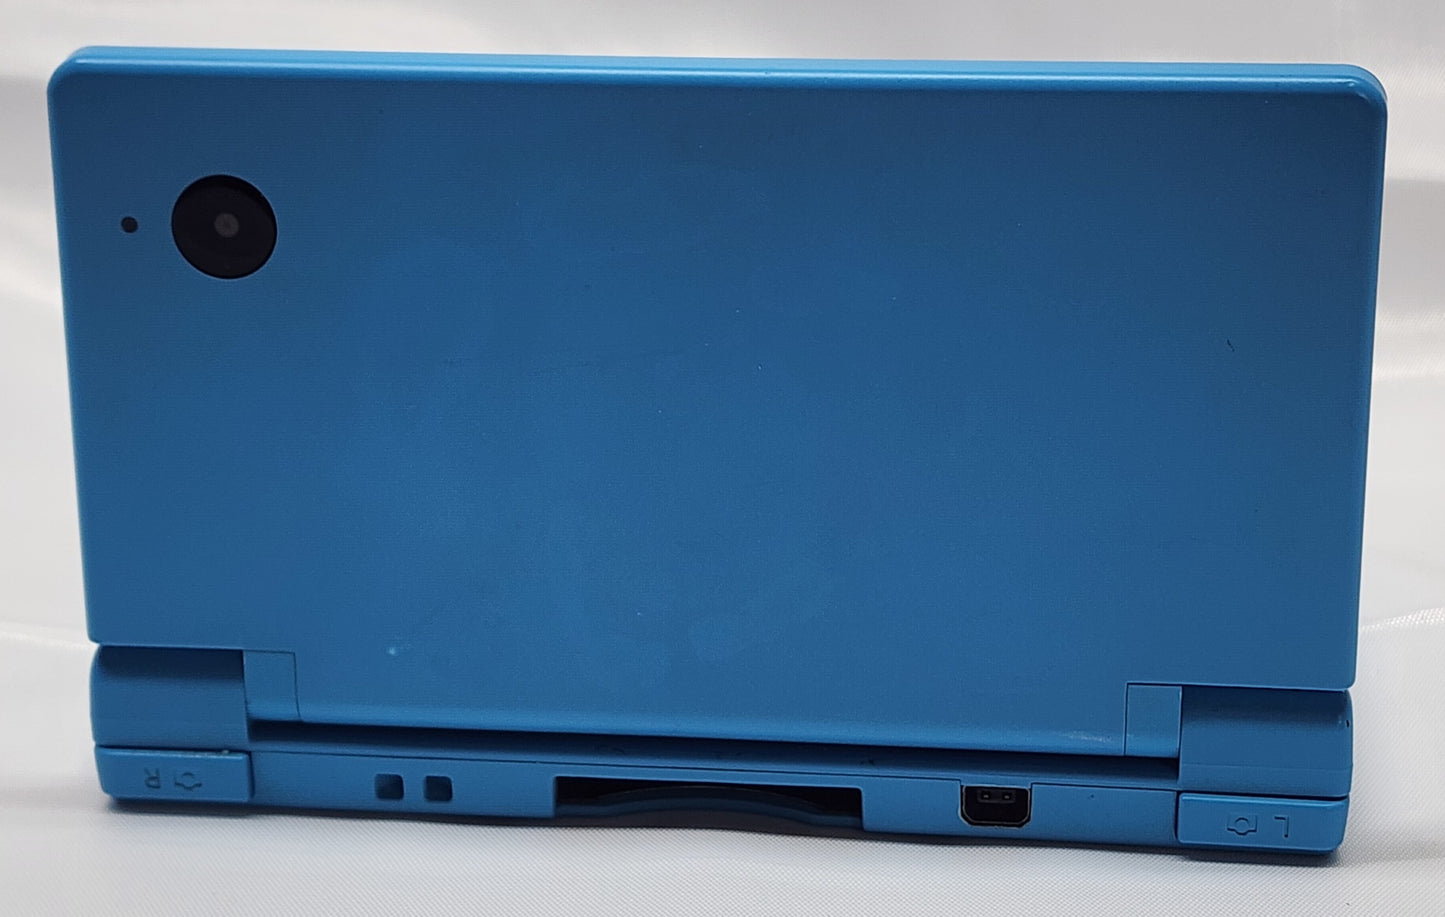 Blue DSi. Charger & Stylus Included. Works Great.